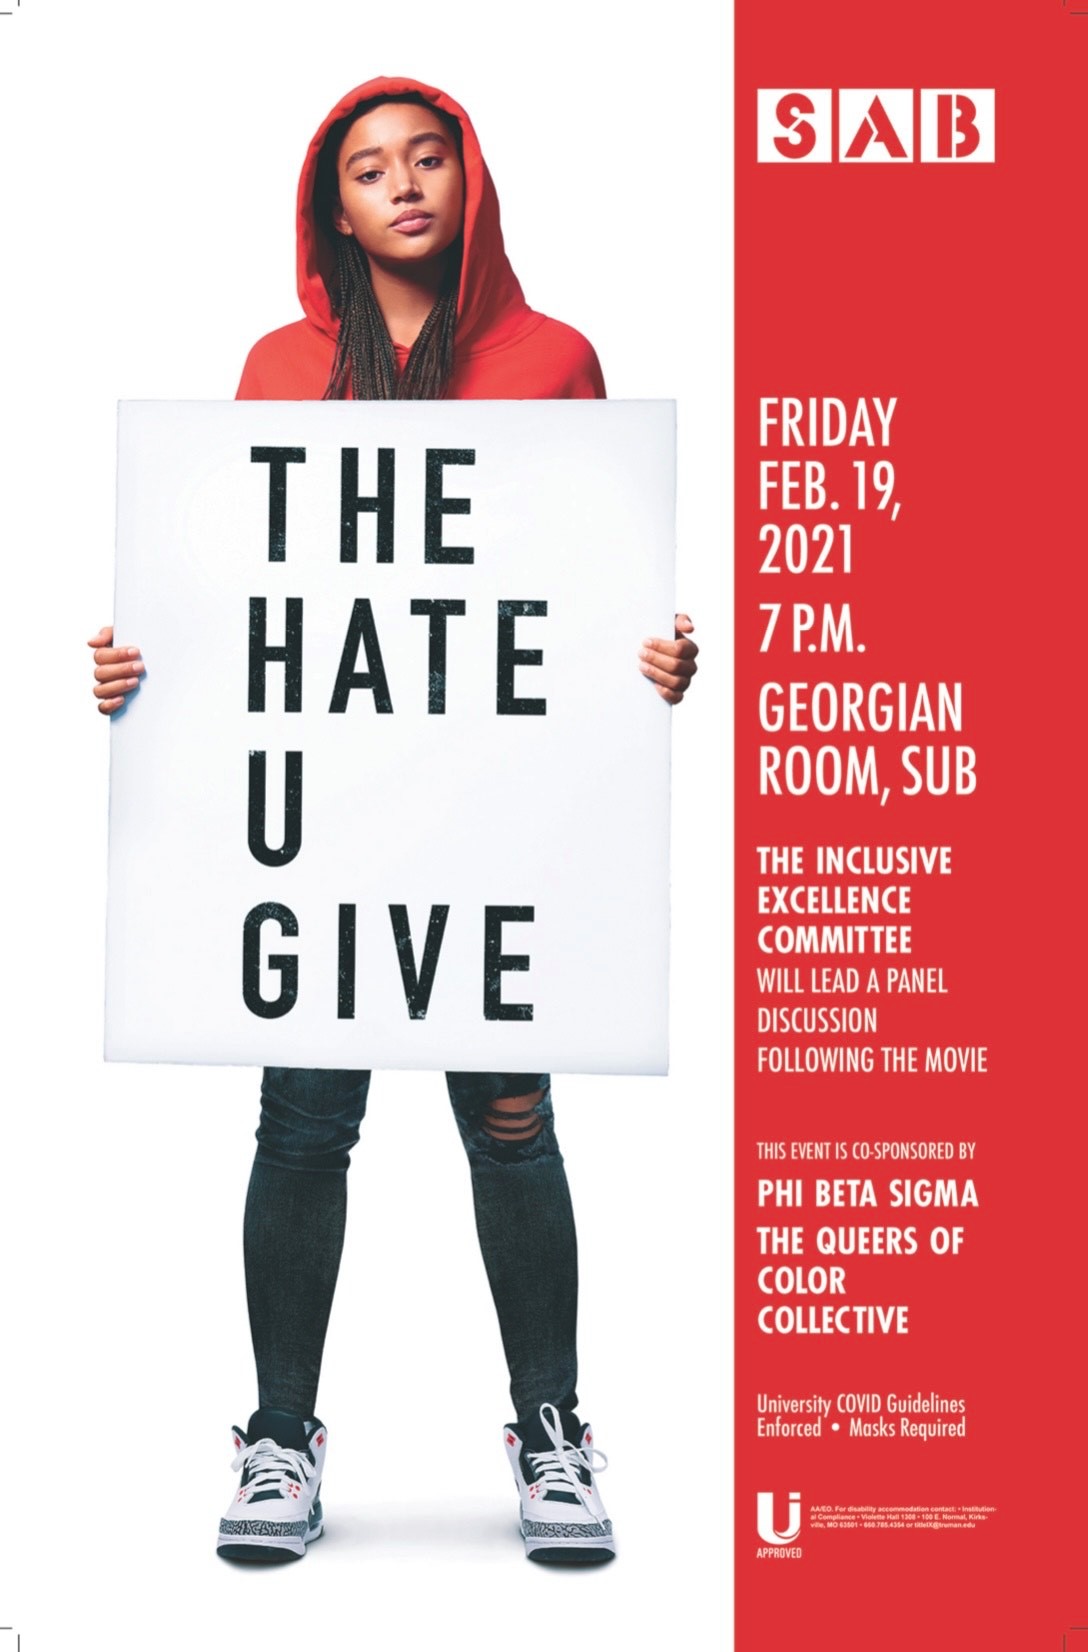 The Hate U GIve viewing and discussion poster